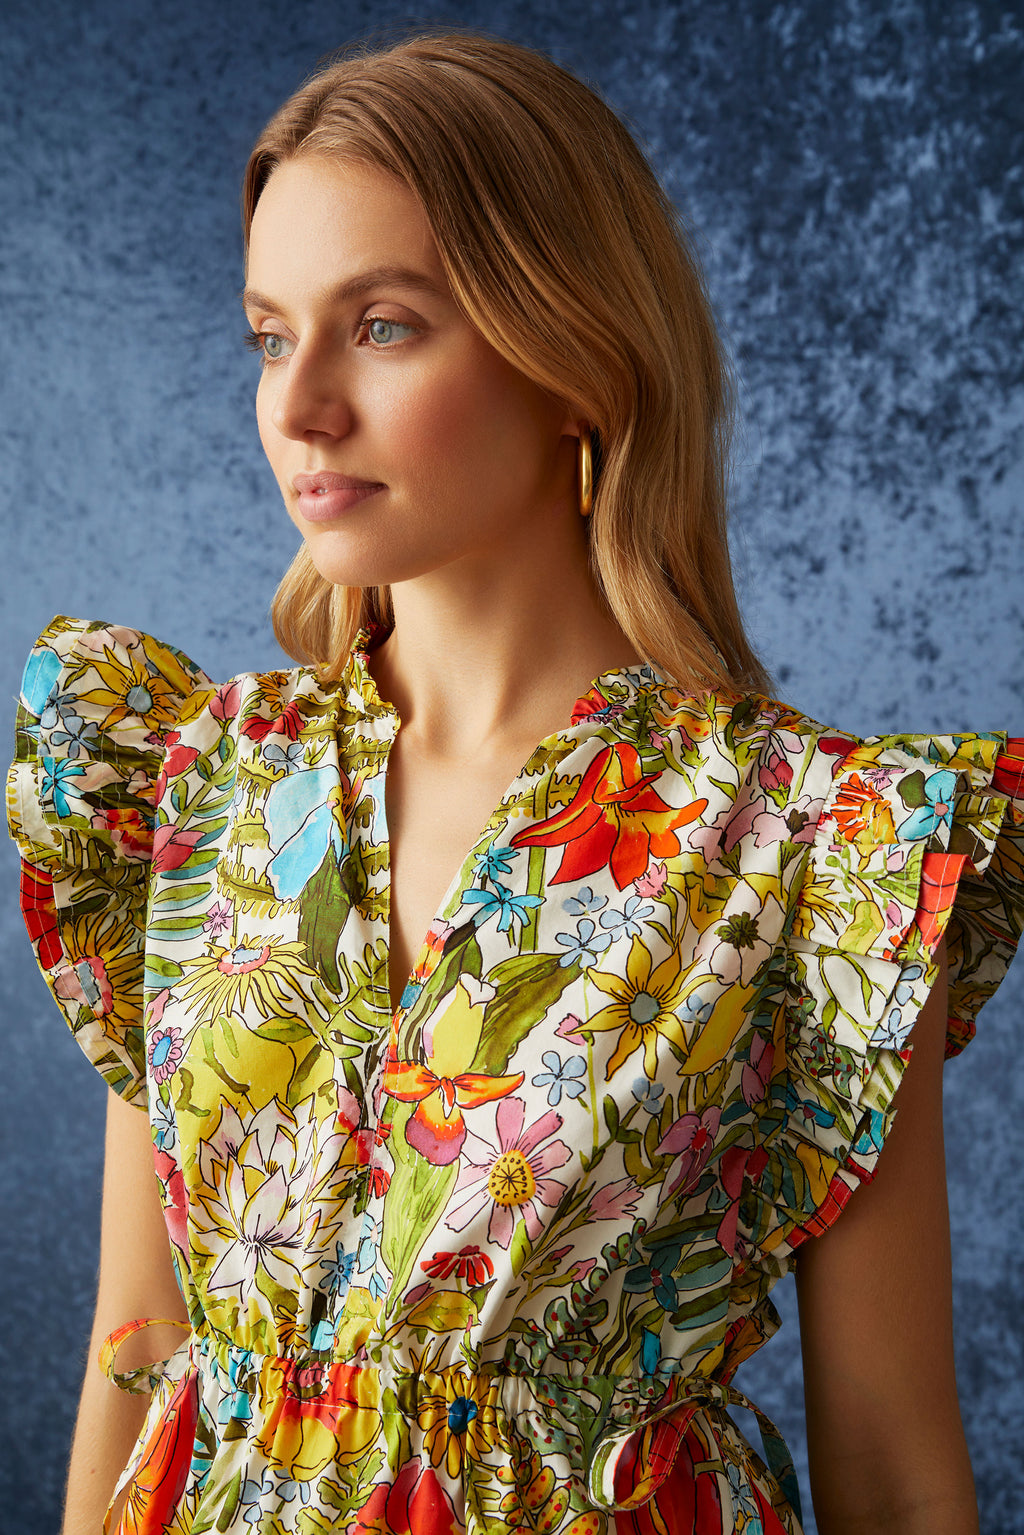 Multicolor floral printed top that has adjustable ties at each side of the waist to cinch in the waist